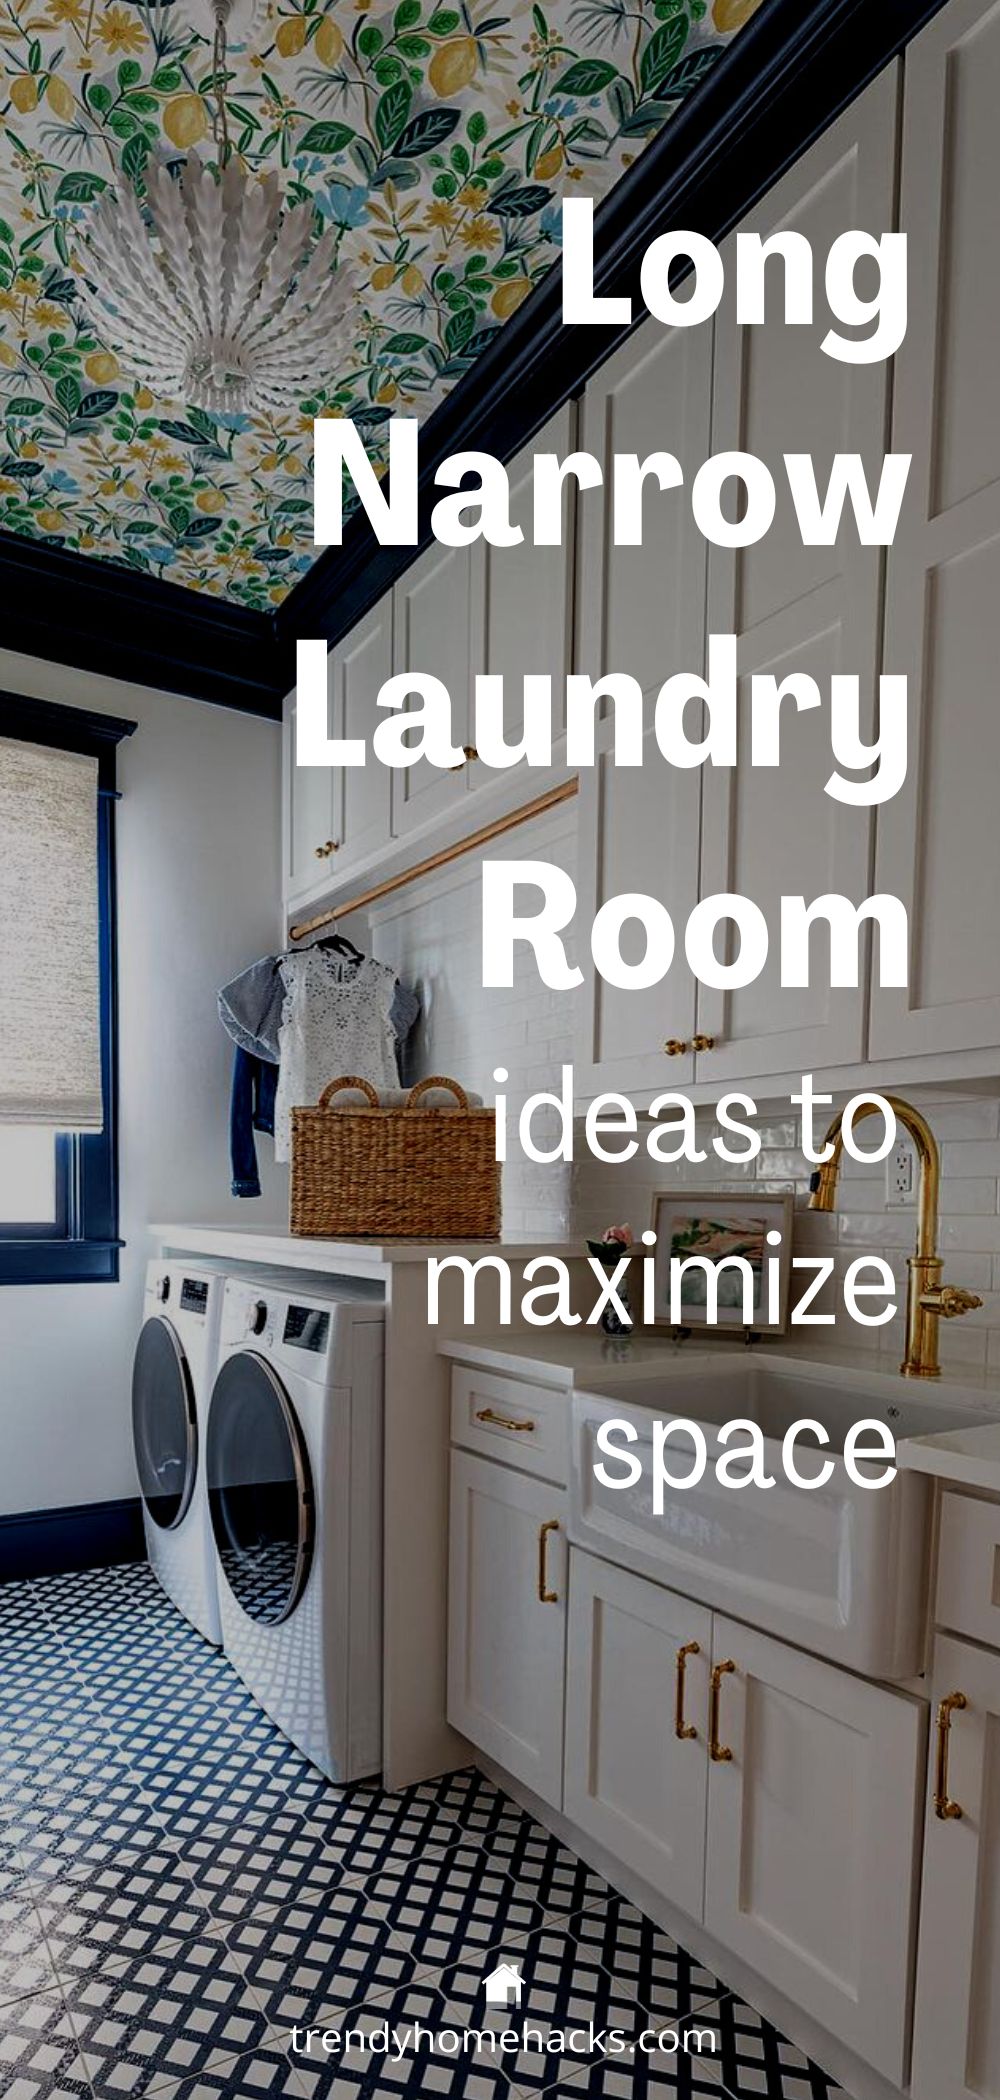 a Pinterest pin with a laundry photo in the background and text overlay 'Long Narrow Laundry Room - ideas to maximize space' is a handy image to share this post on social media.